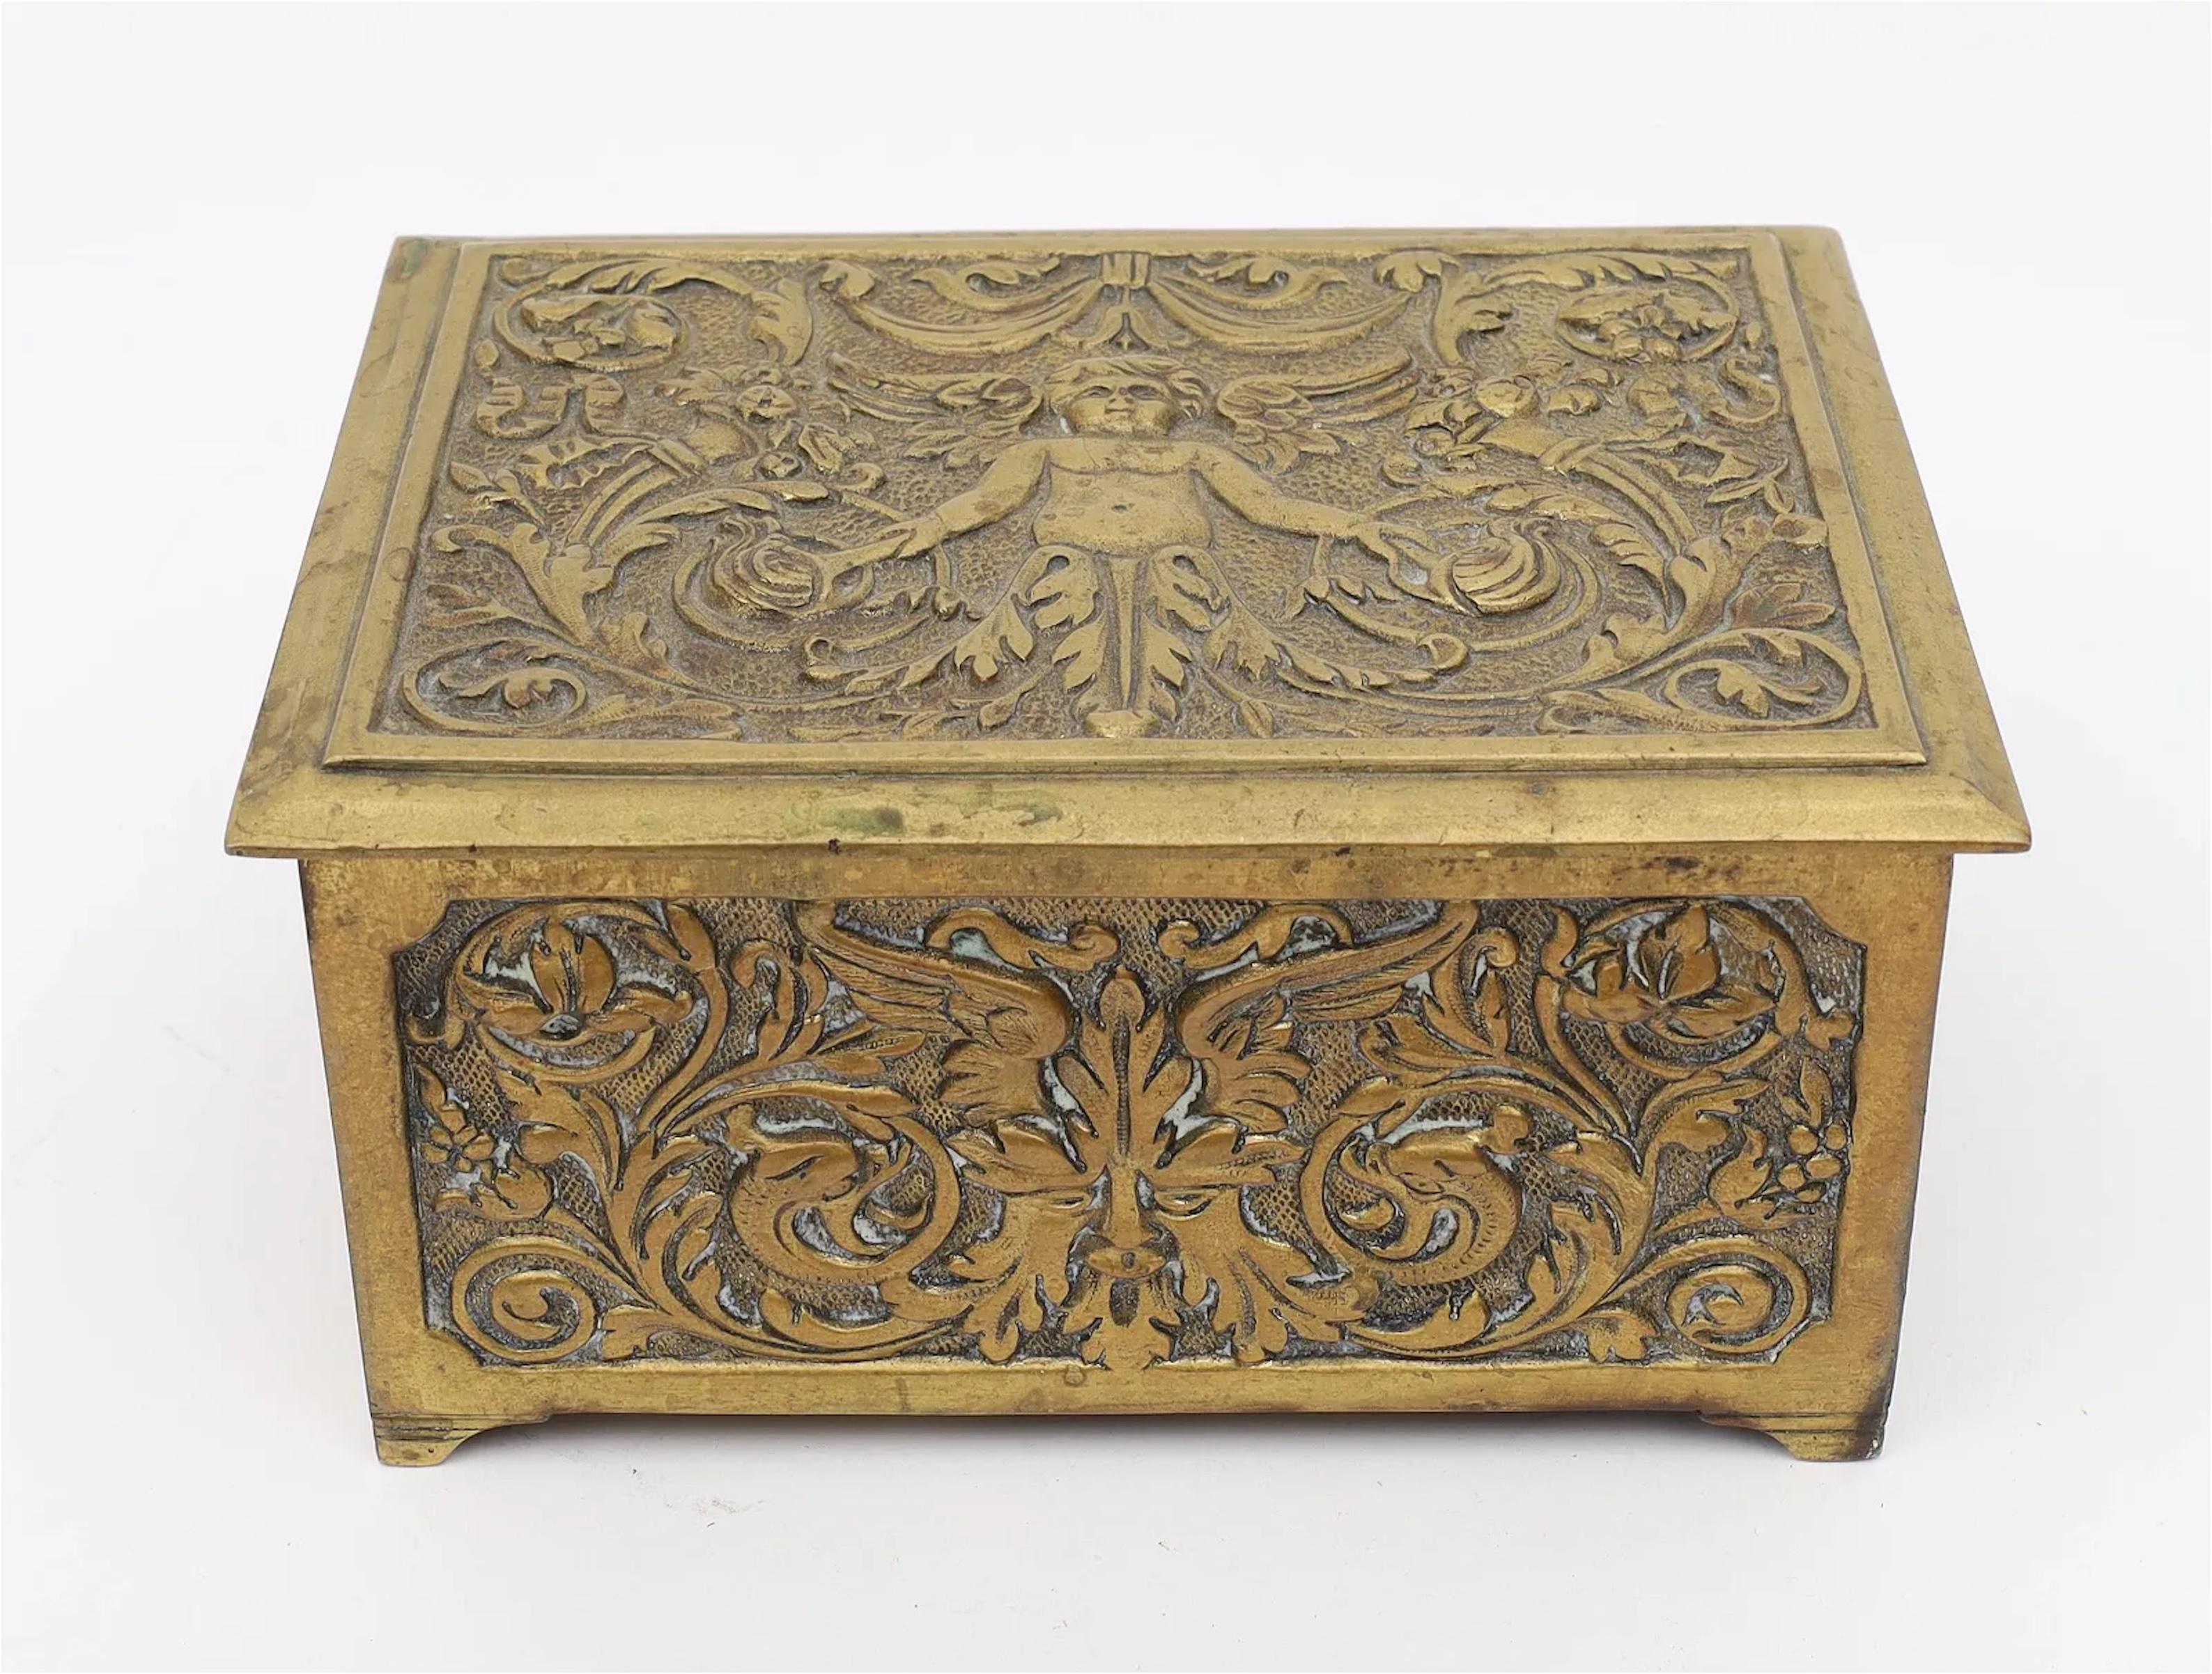 Highly decorated Renaissance style Belgium solid brass jewelry trinket box.